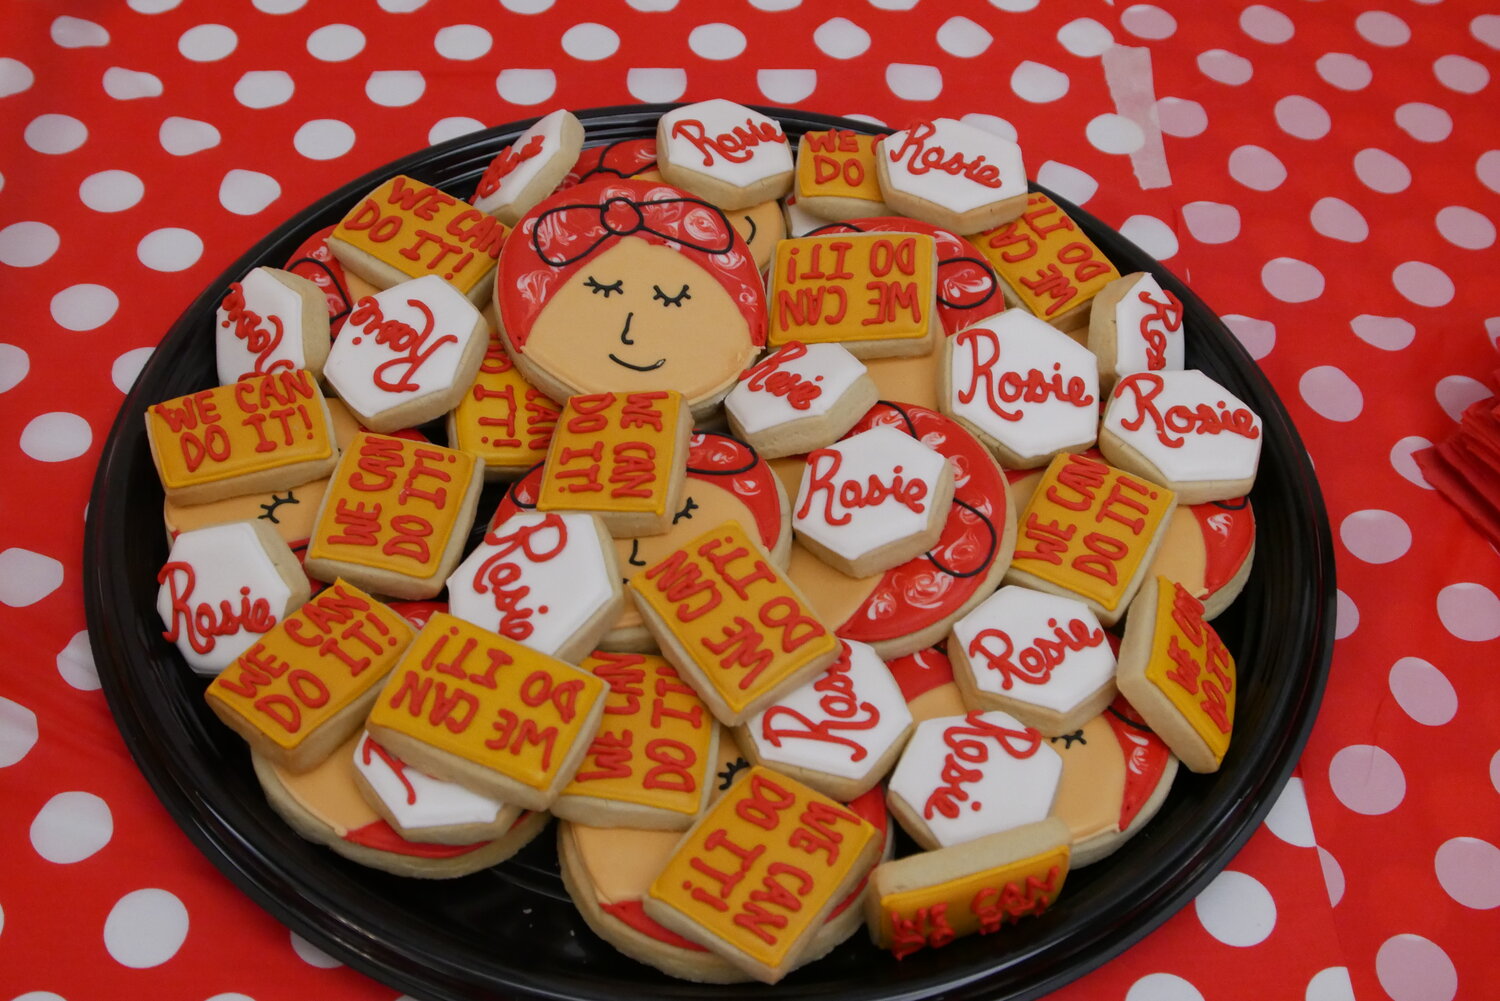 Cookies served at the DHS event were in keeping with the Rosie the Riveter theme.